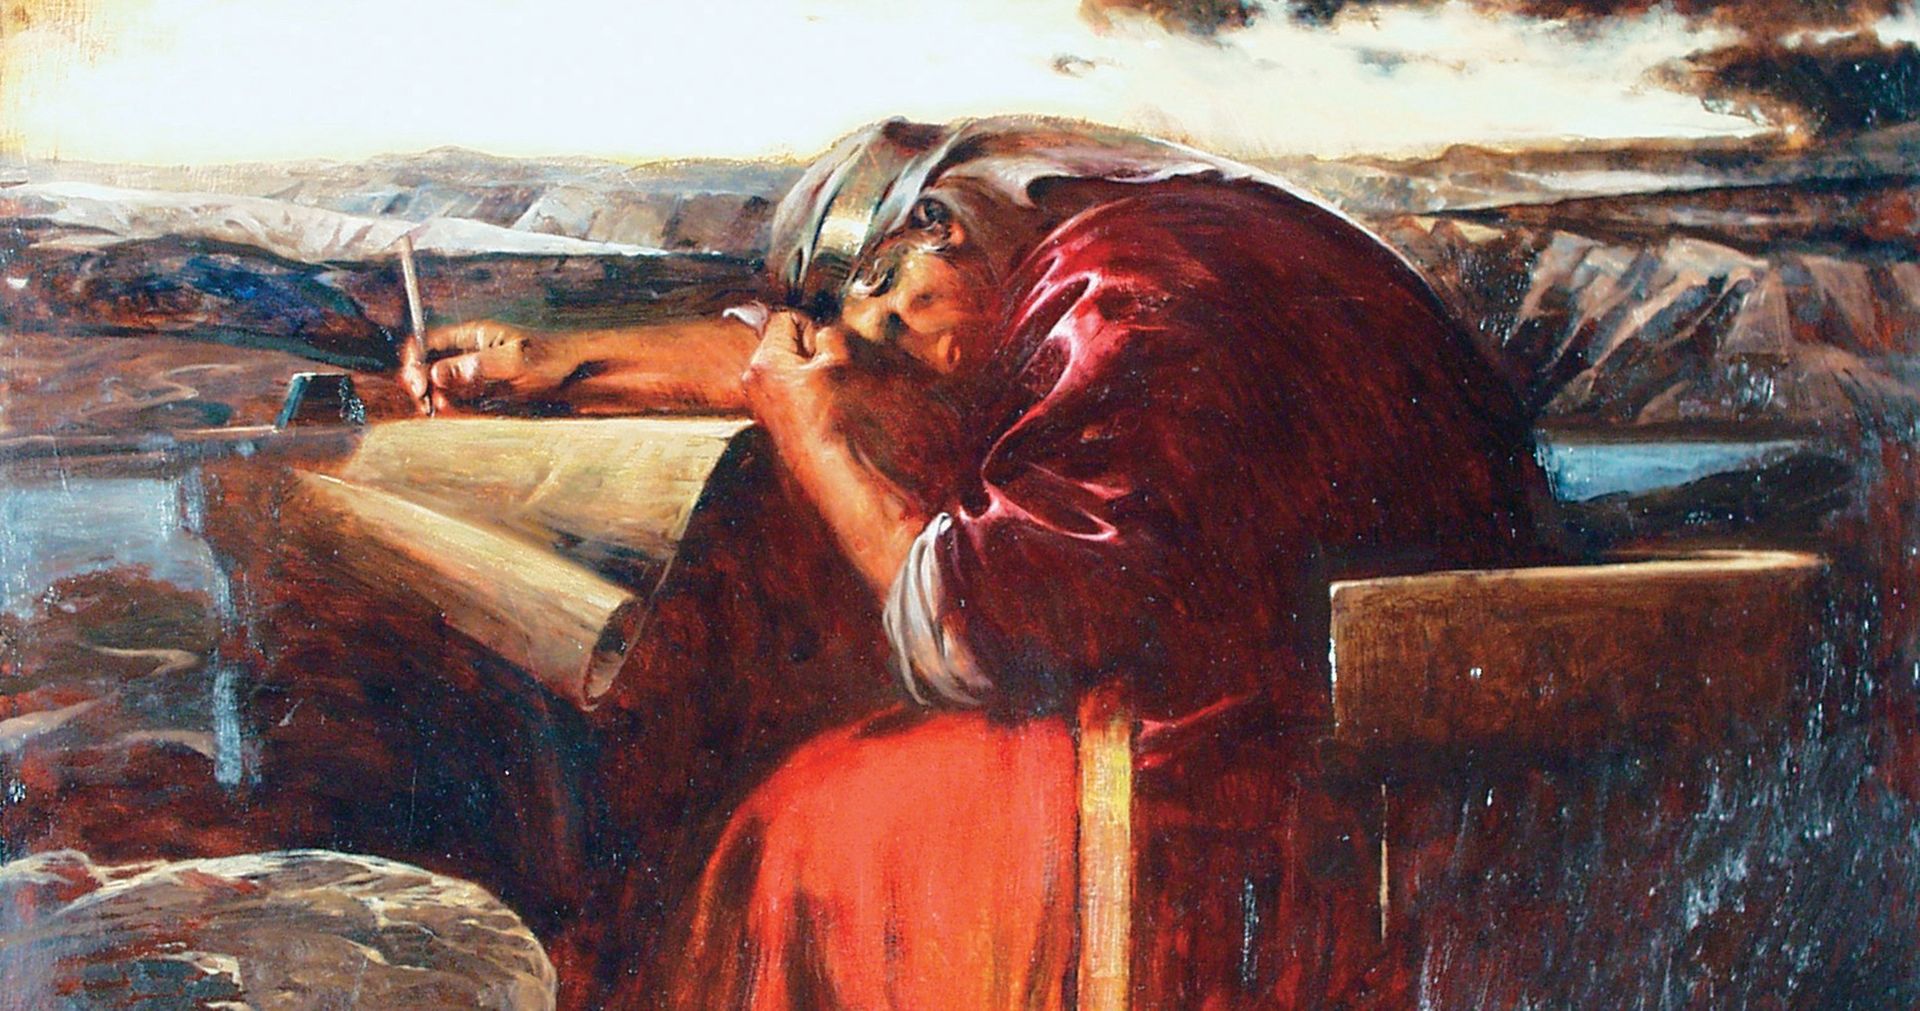 An oil painting depicting David, dressed in royal colors and headdress, sitting in a chair writing, head bowed as if in prayer and contemplation.